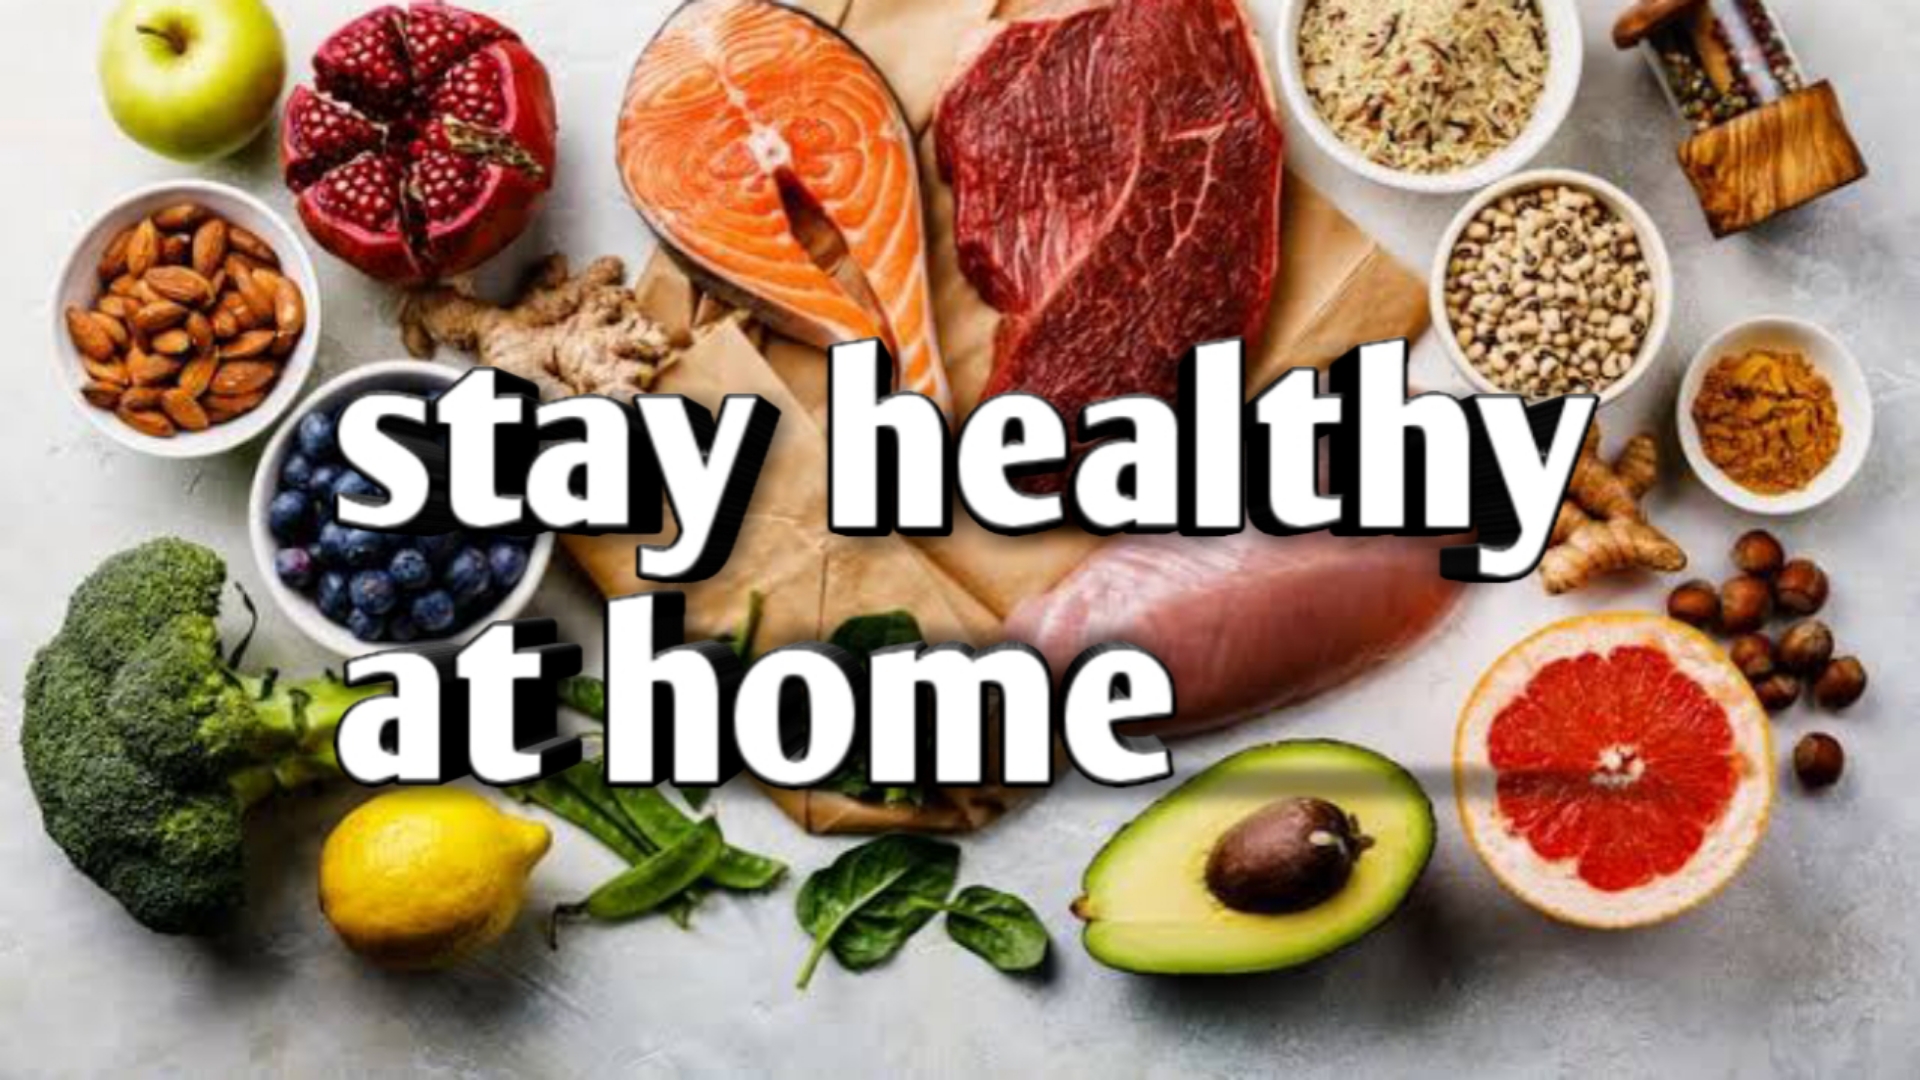 Stay Healthy At home